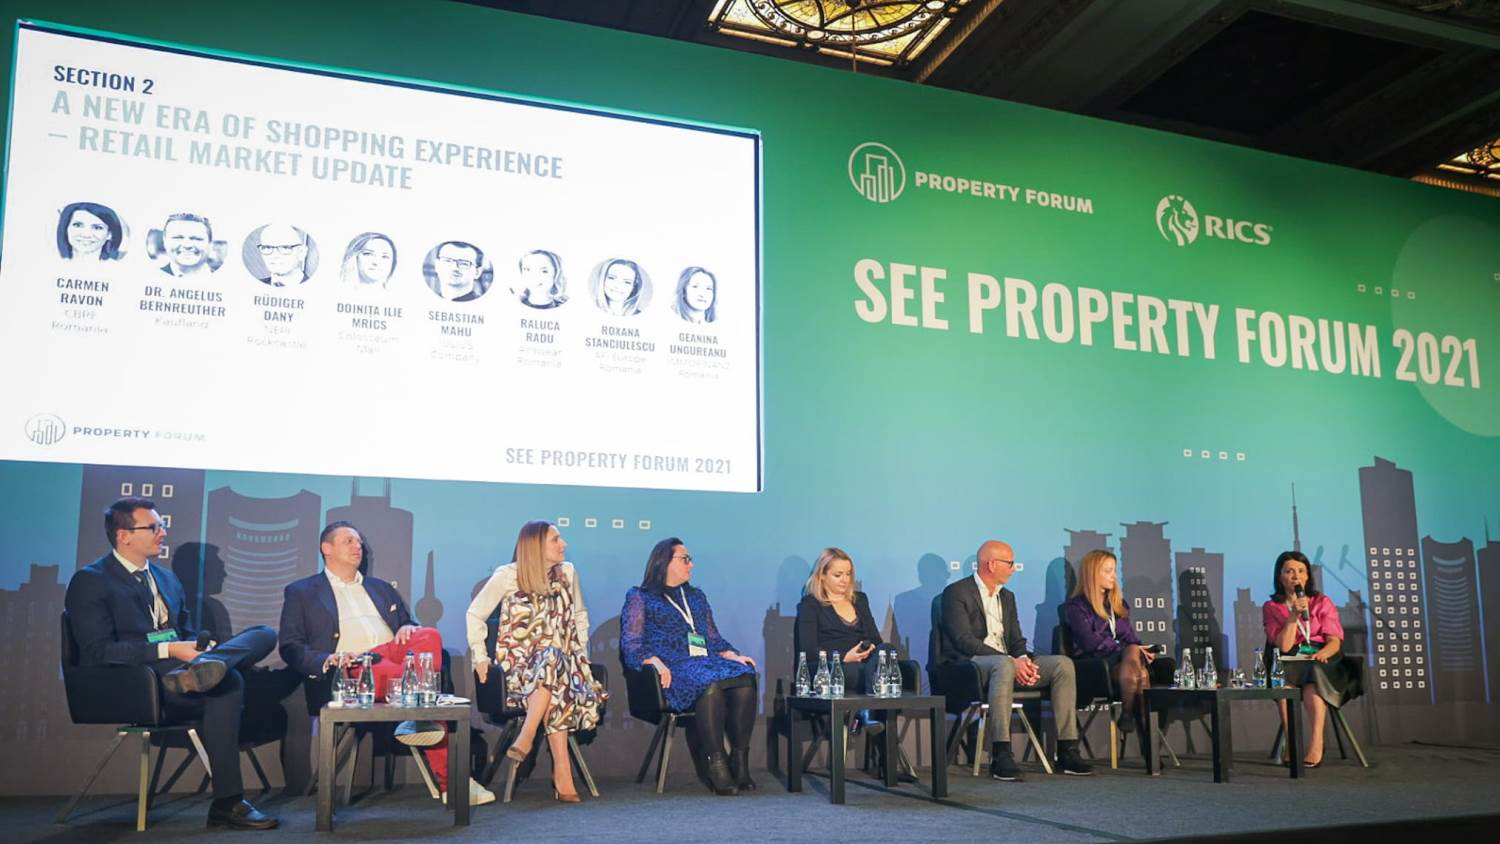 News Article Bucharest conference e-commerce event report retail Romania SEE Property Forum SEE Property Forum 2021 shopping